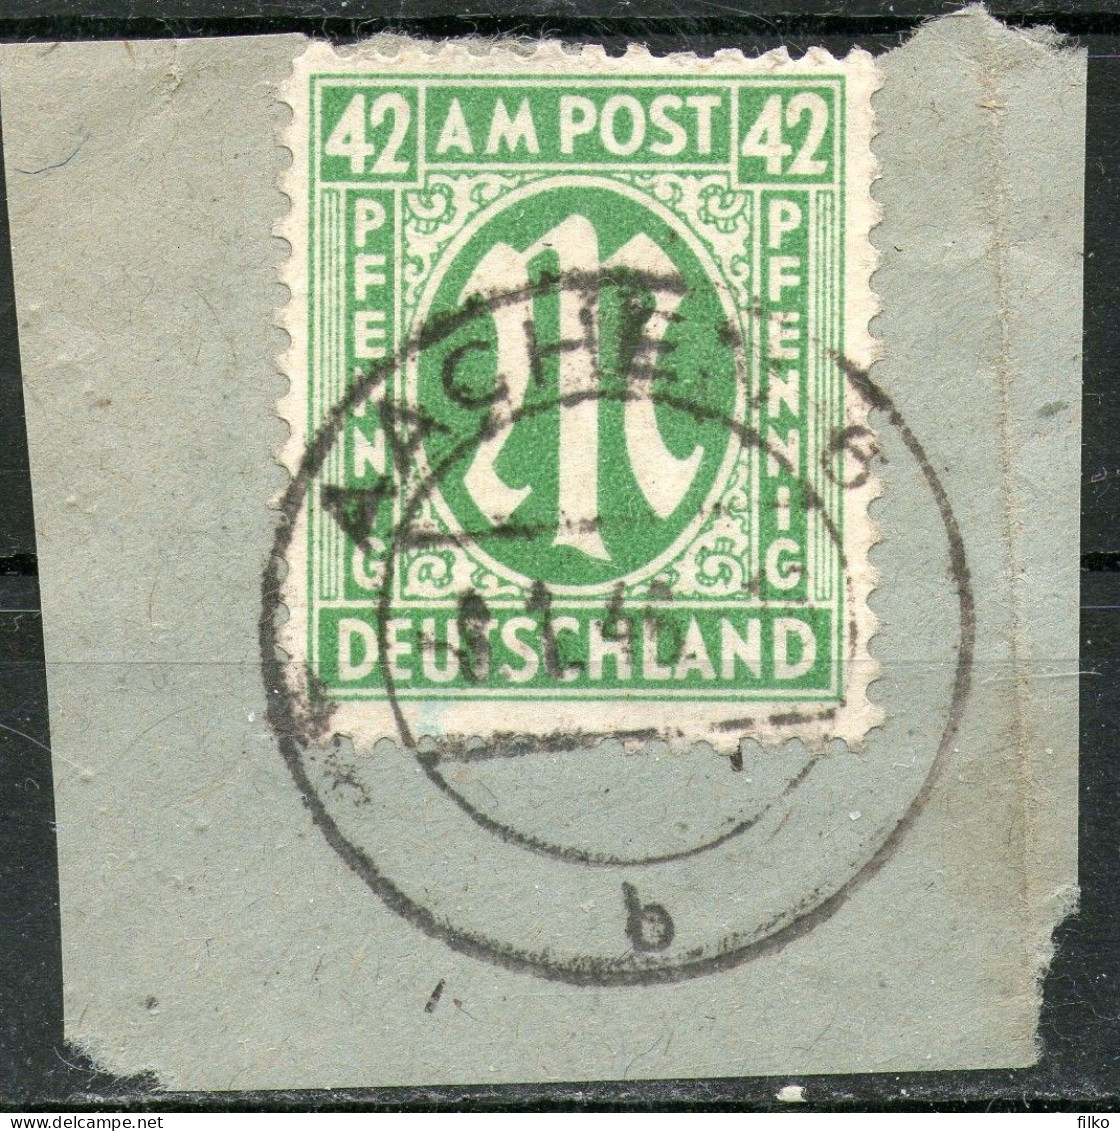 Germany,BIZONE AM-POST Nr 31,cancel Aachen,08.01.1946,used,as Scan - Afgestempeld